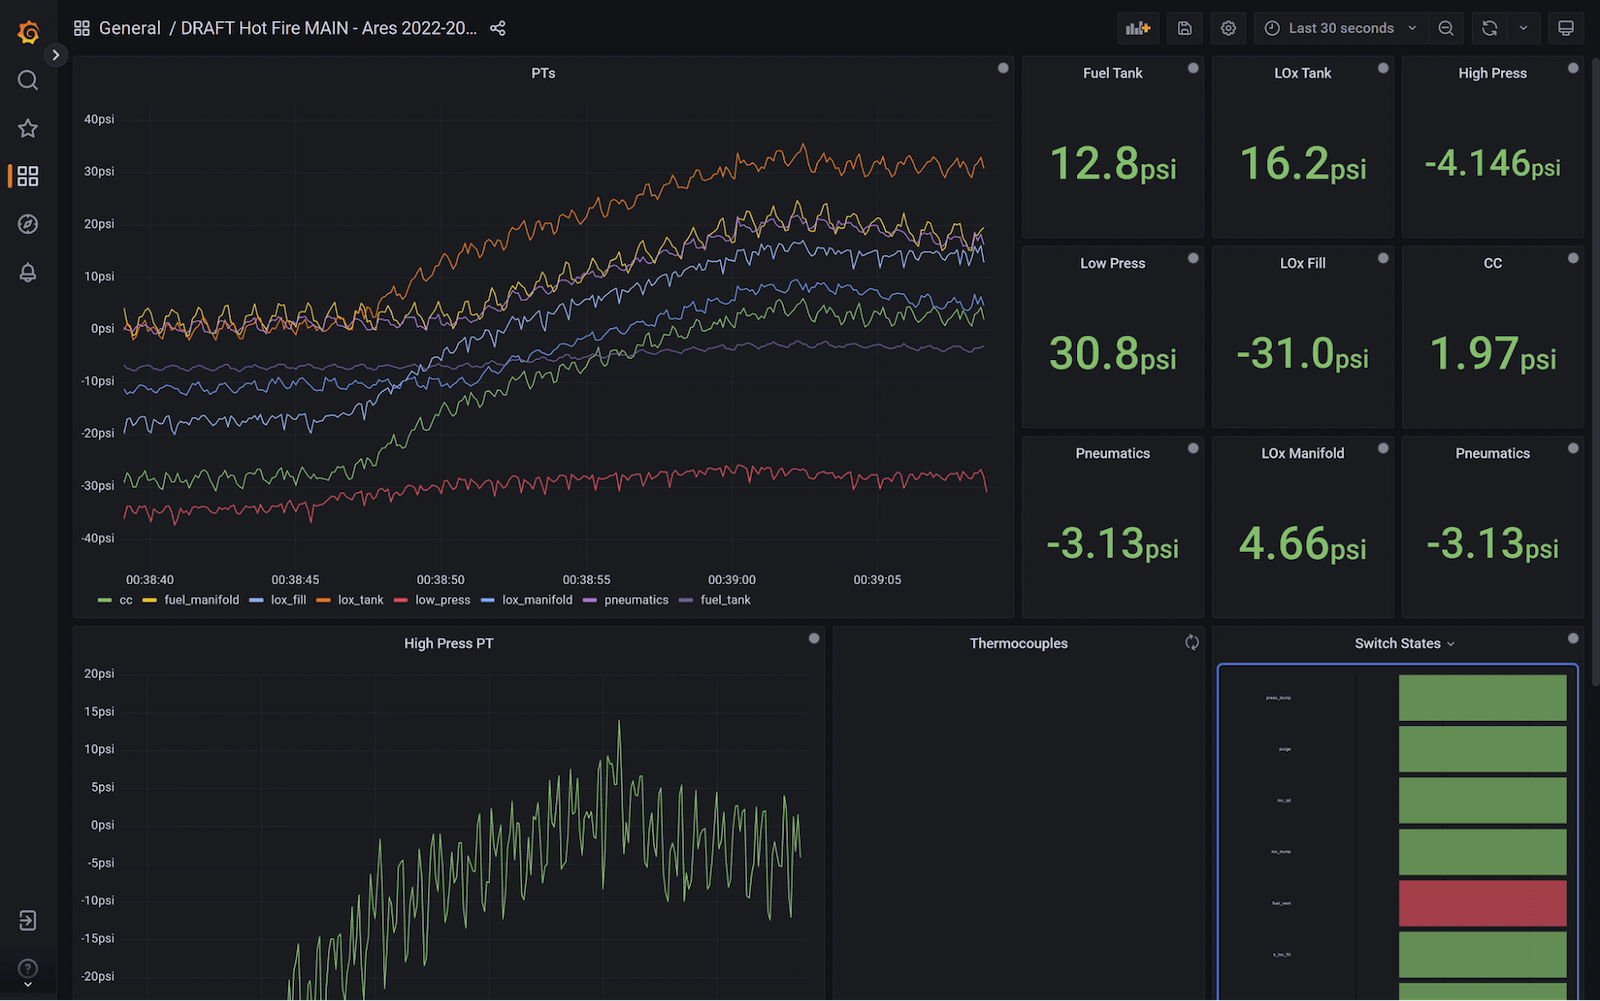 A screenshot of a Grafana dashboard with sensor and valve data from a rocket launch